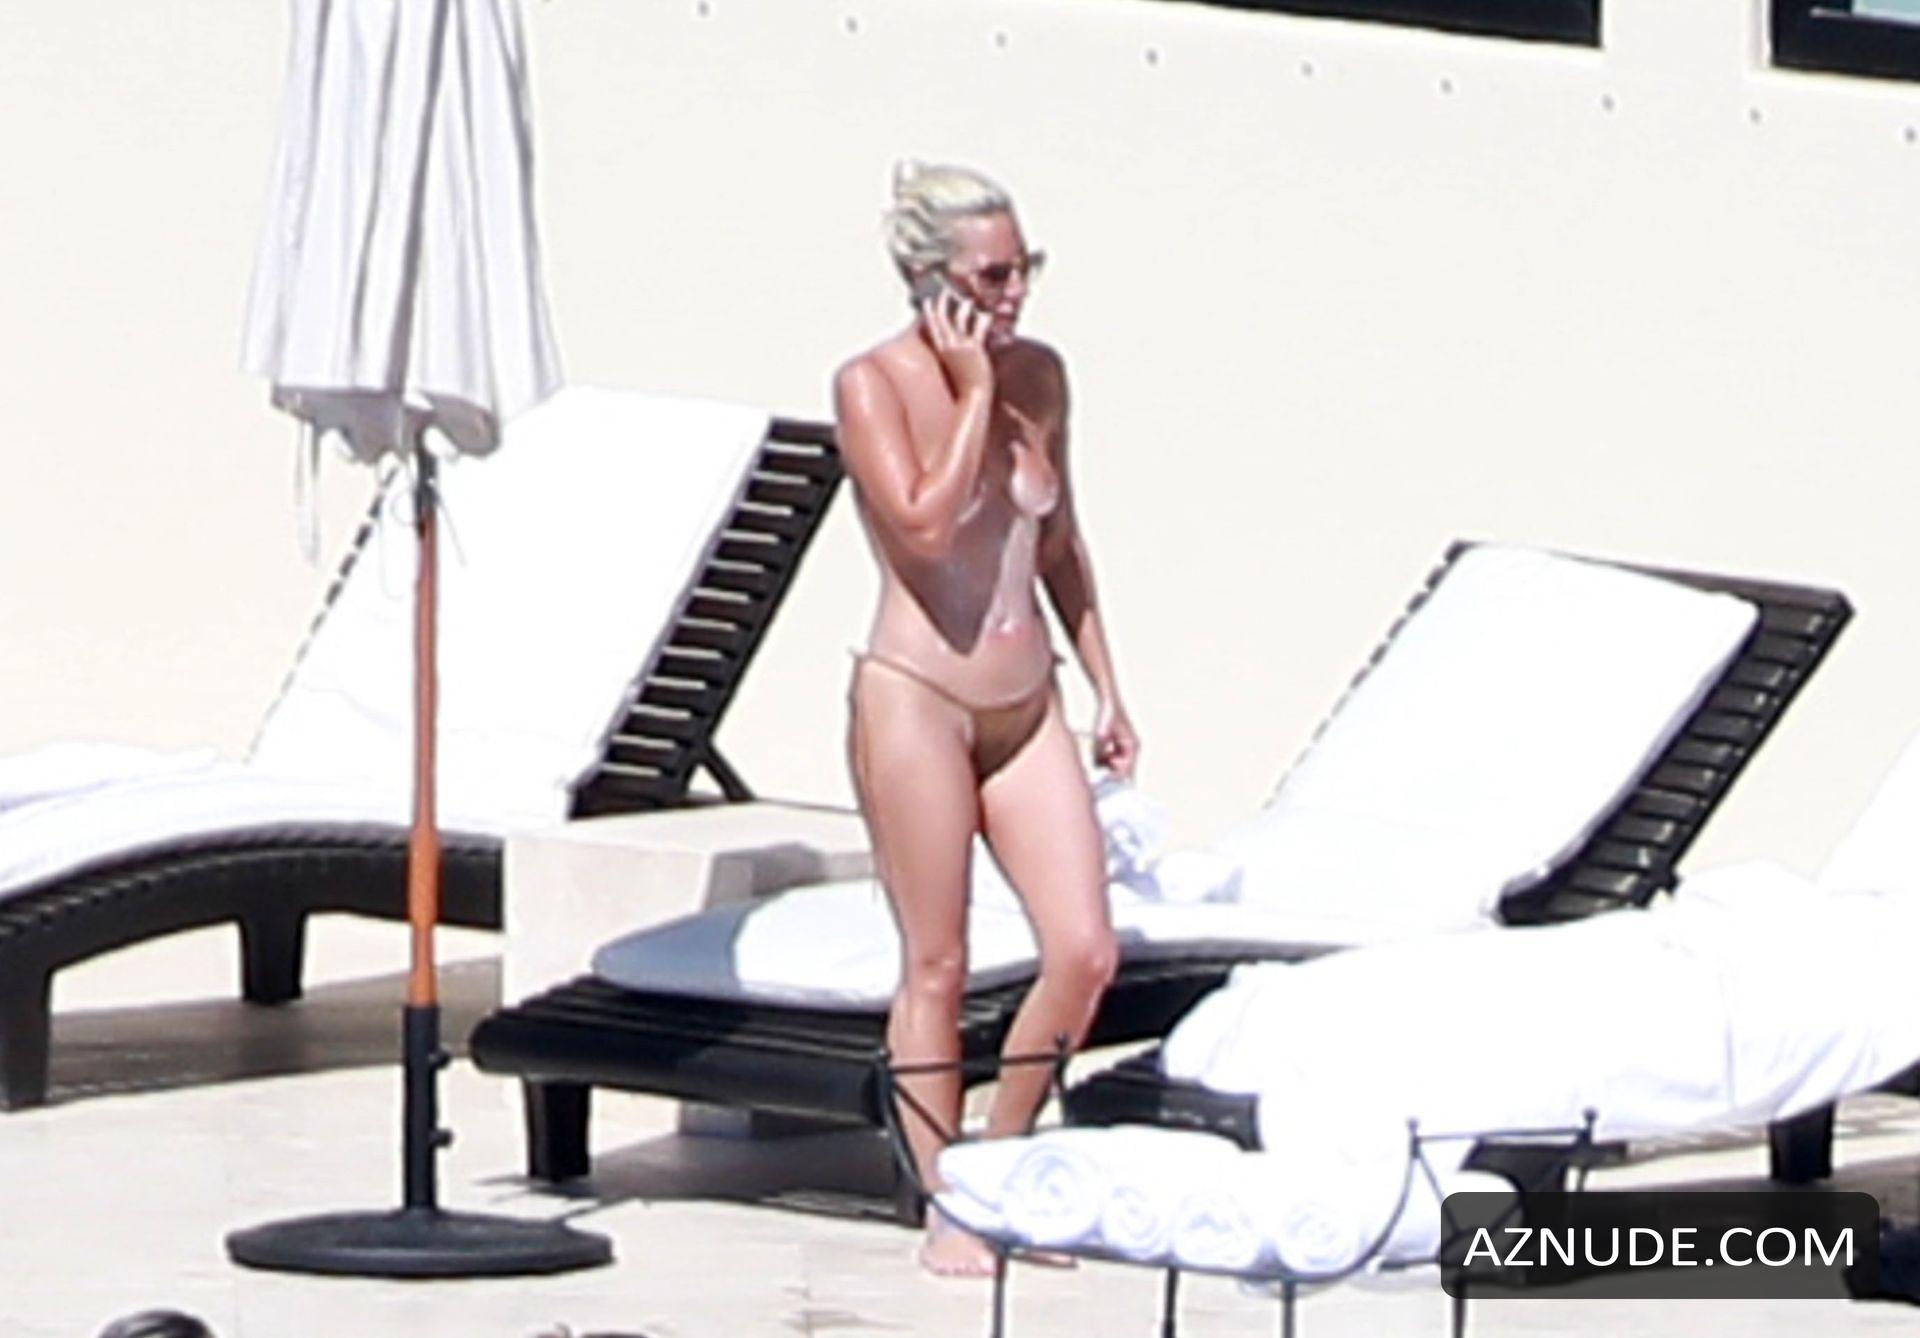 Lady Gaga Topless Sunbathing In Mexico With Friends 14 02